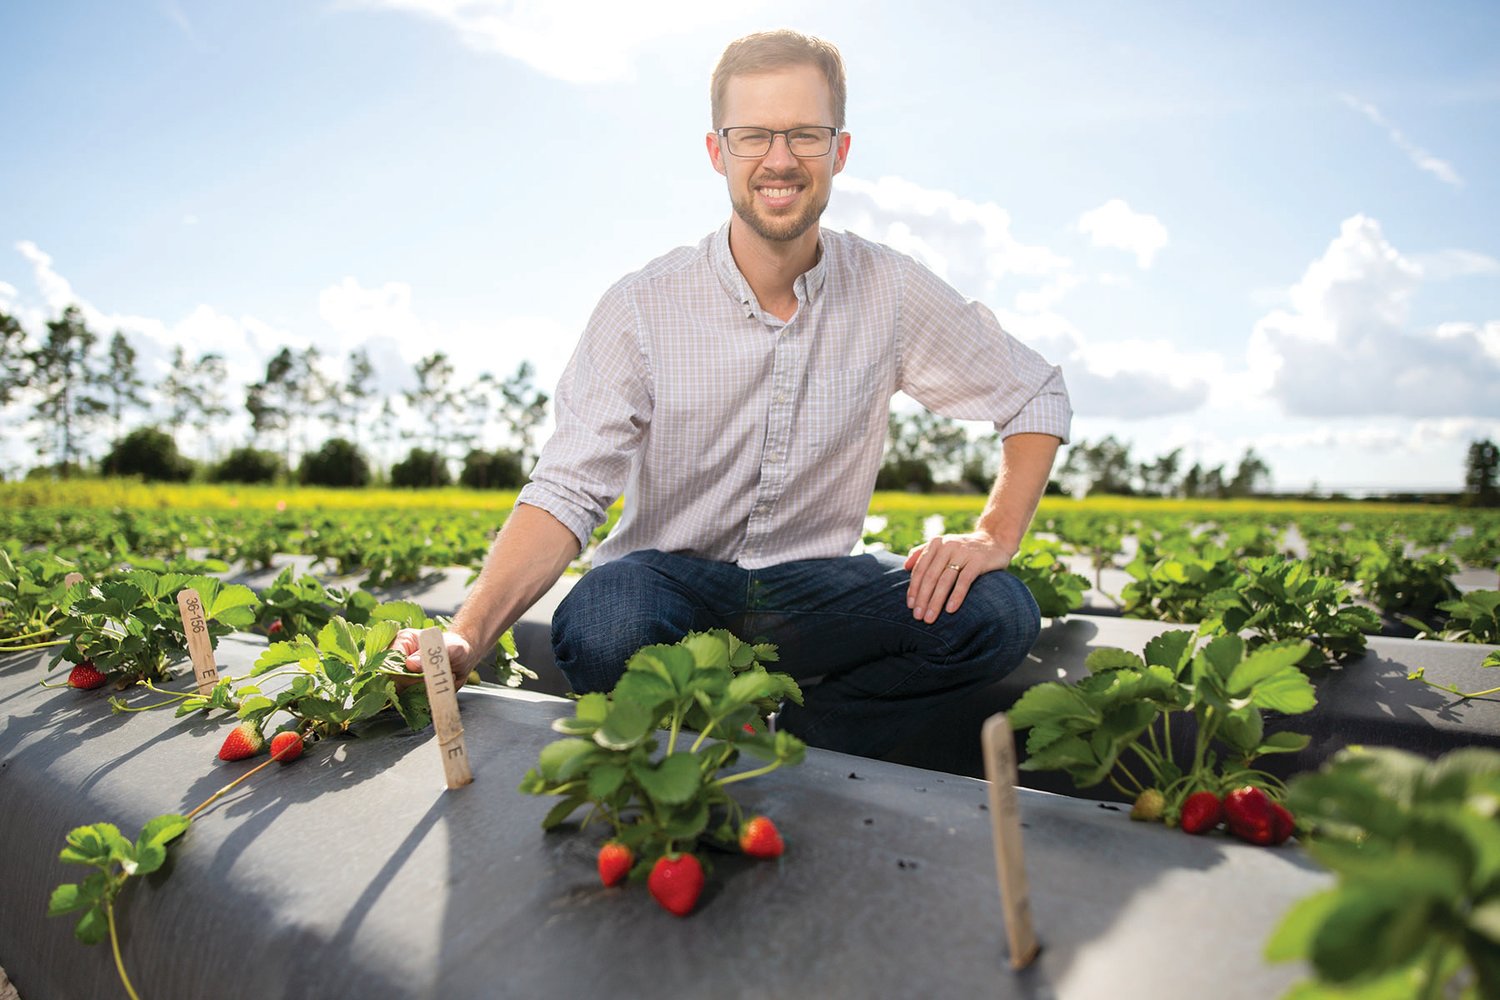 Dr. Vance Whitaker is a UF/IFAS associate professor in horticultural sciences at the Gulf Coast Research and Education Center.